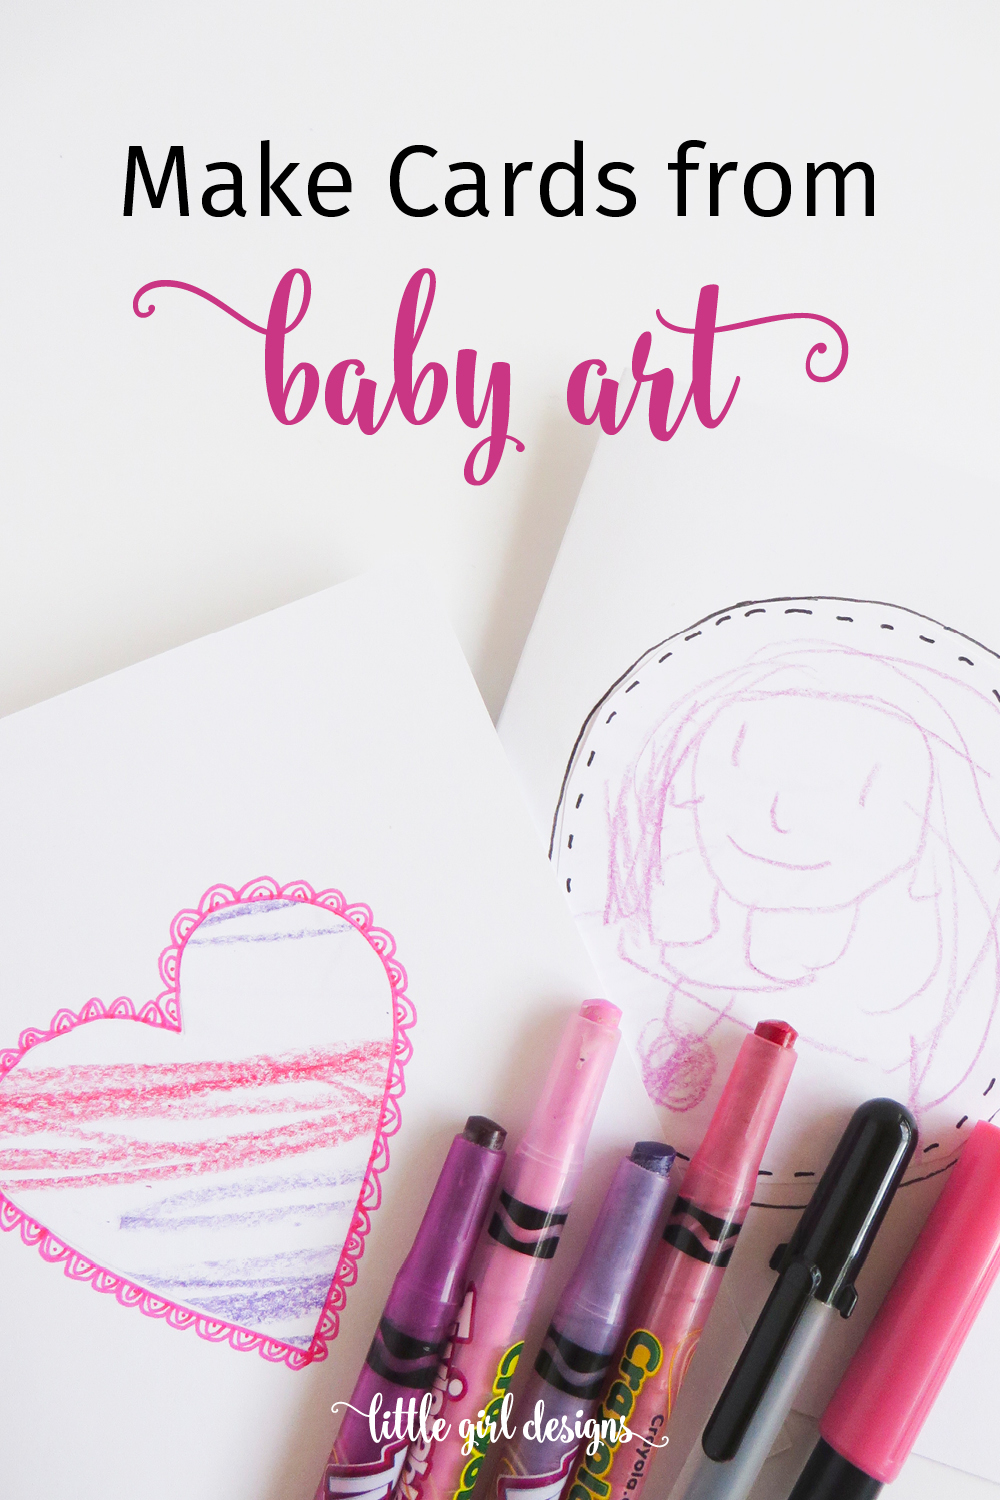 How To Make Cards from Baby Art